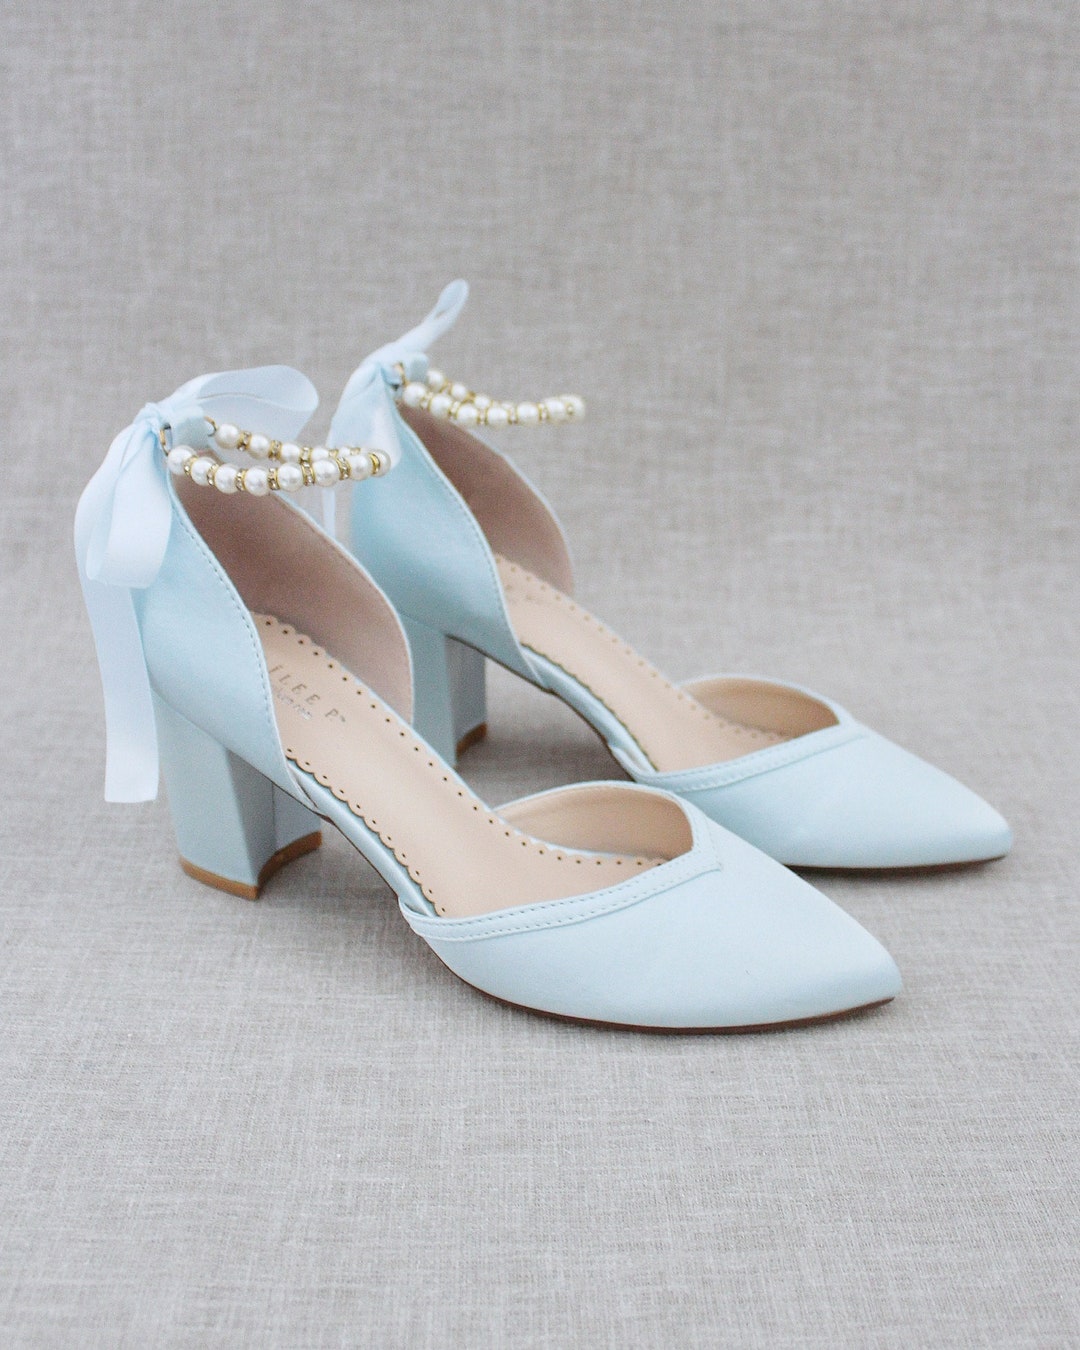 Satin Almond Toe Block Heel With Pearl Ankle Strap Women Wedding Shoes ...